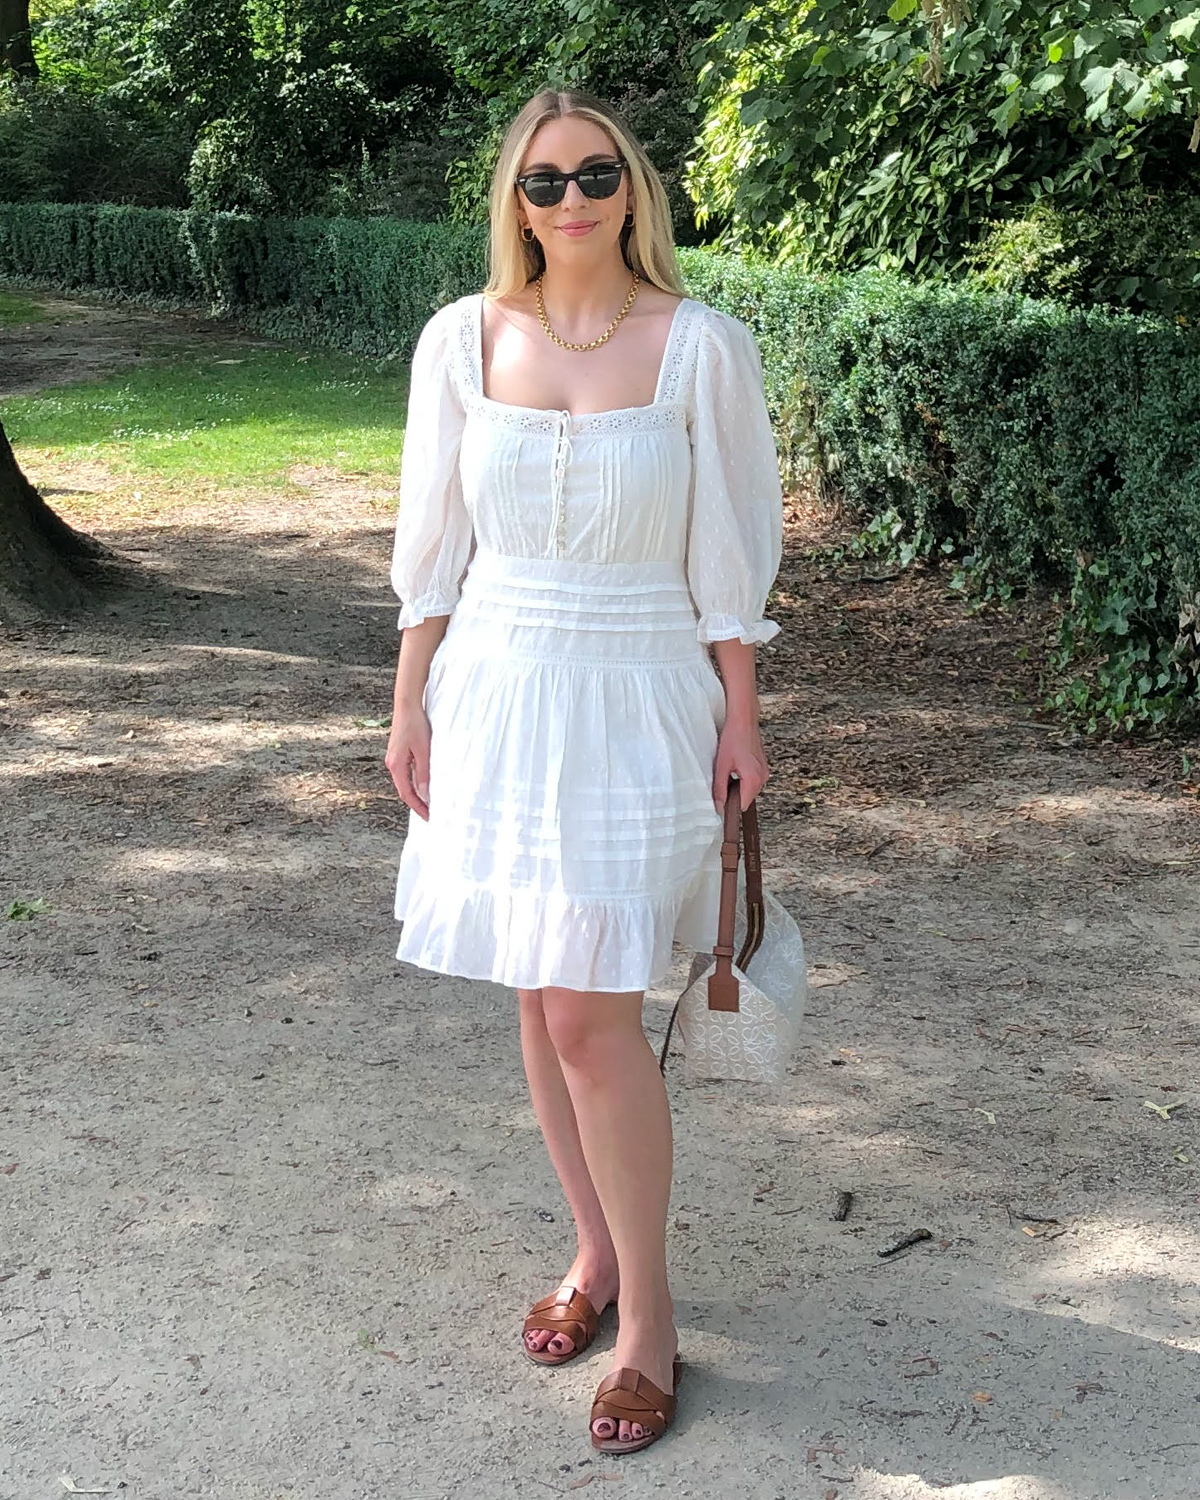 What to Wear in Paris: Acting assistant editor Maxine Eggenberger shares what she packed for a long weekend in Paris